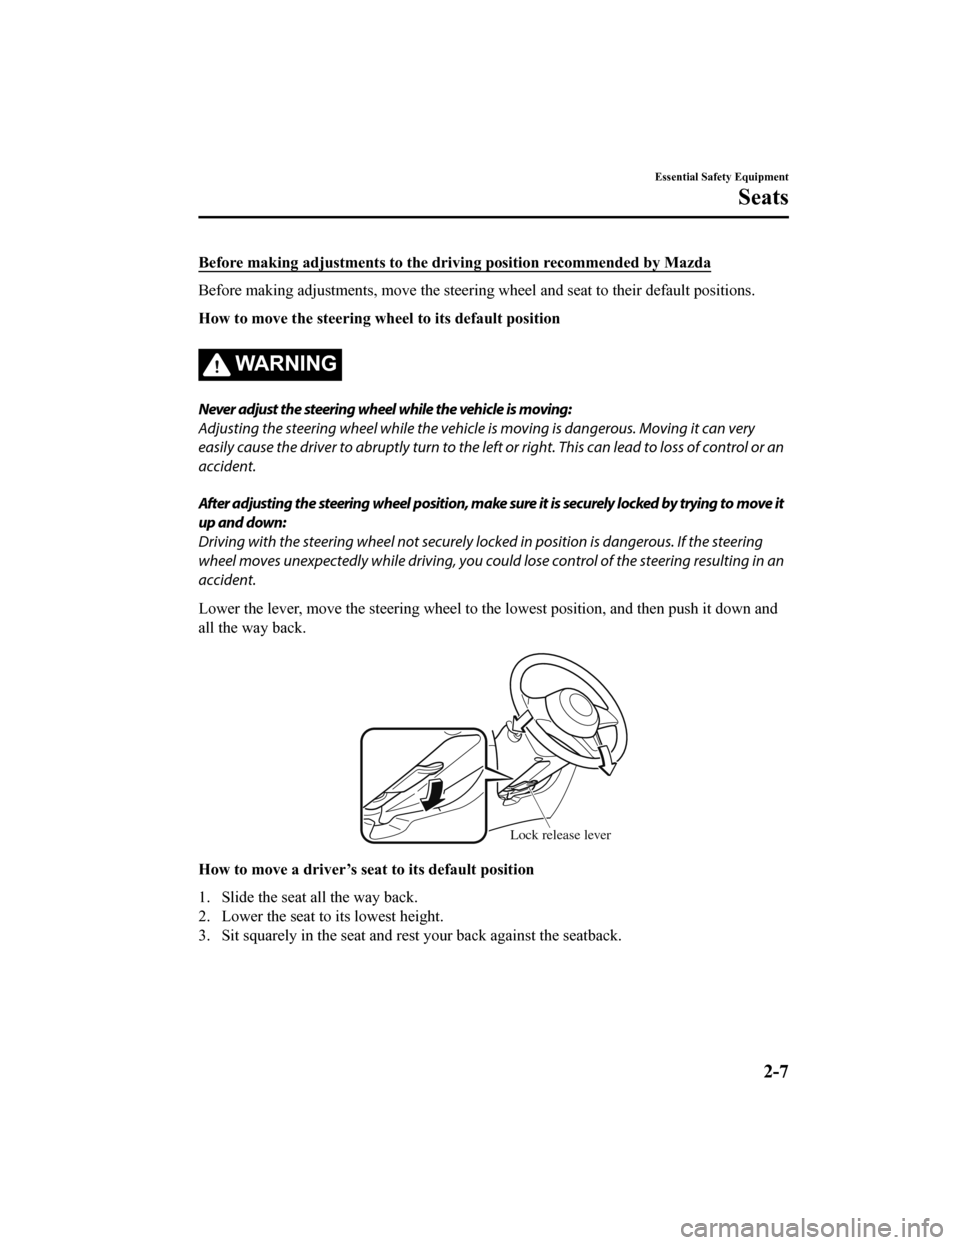 MAZDA MODEL 6 2020  Owners Manual (in English) Before making adjustments to the driving position recommended by Mazda
Before making adjustments, move the steering wheel and seat to their default positions.
How to move the steering wh eel to its de